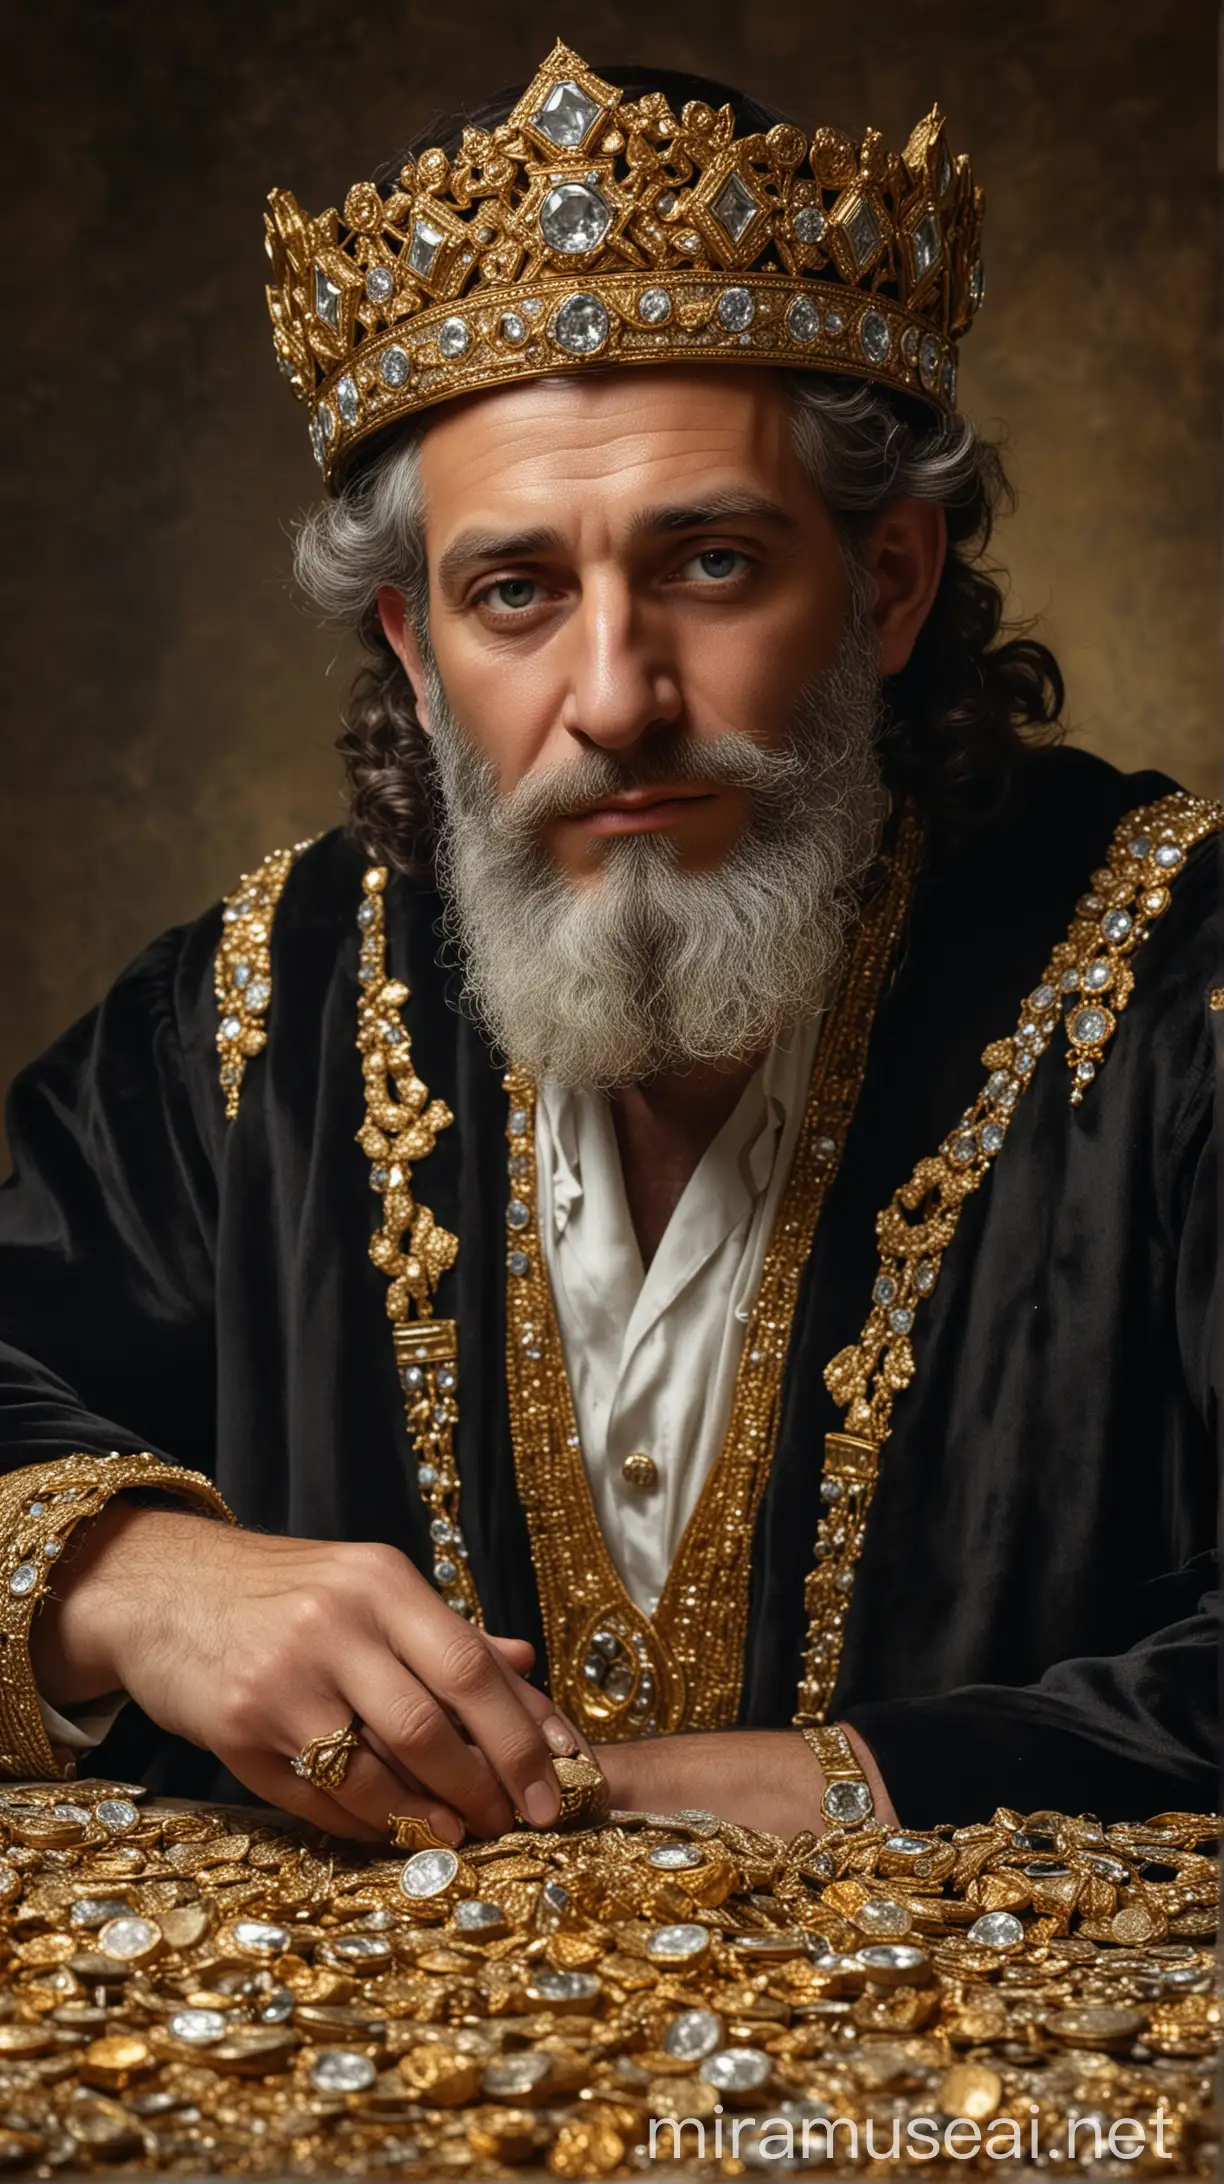 Wealthy Jewish Merchant Adorned in Gold and Diamonds in Ancient Times